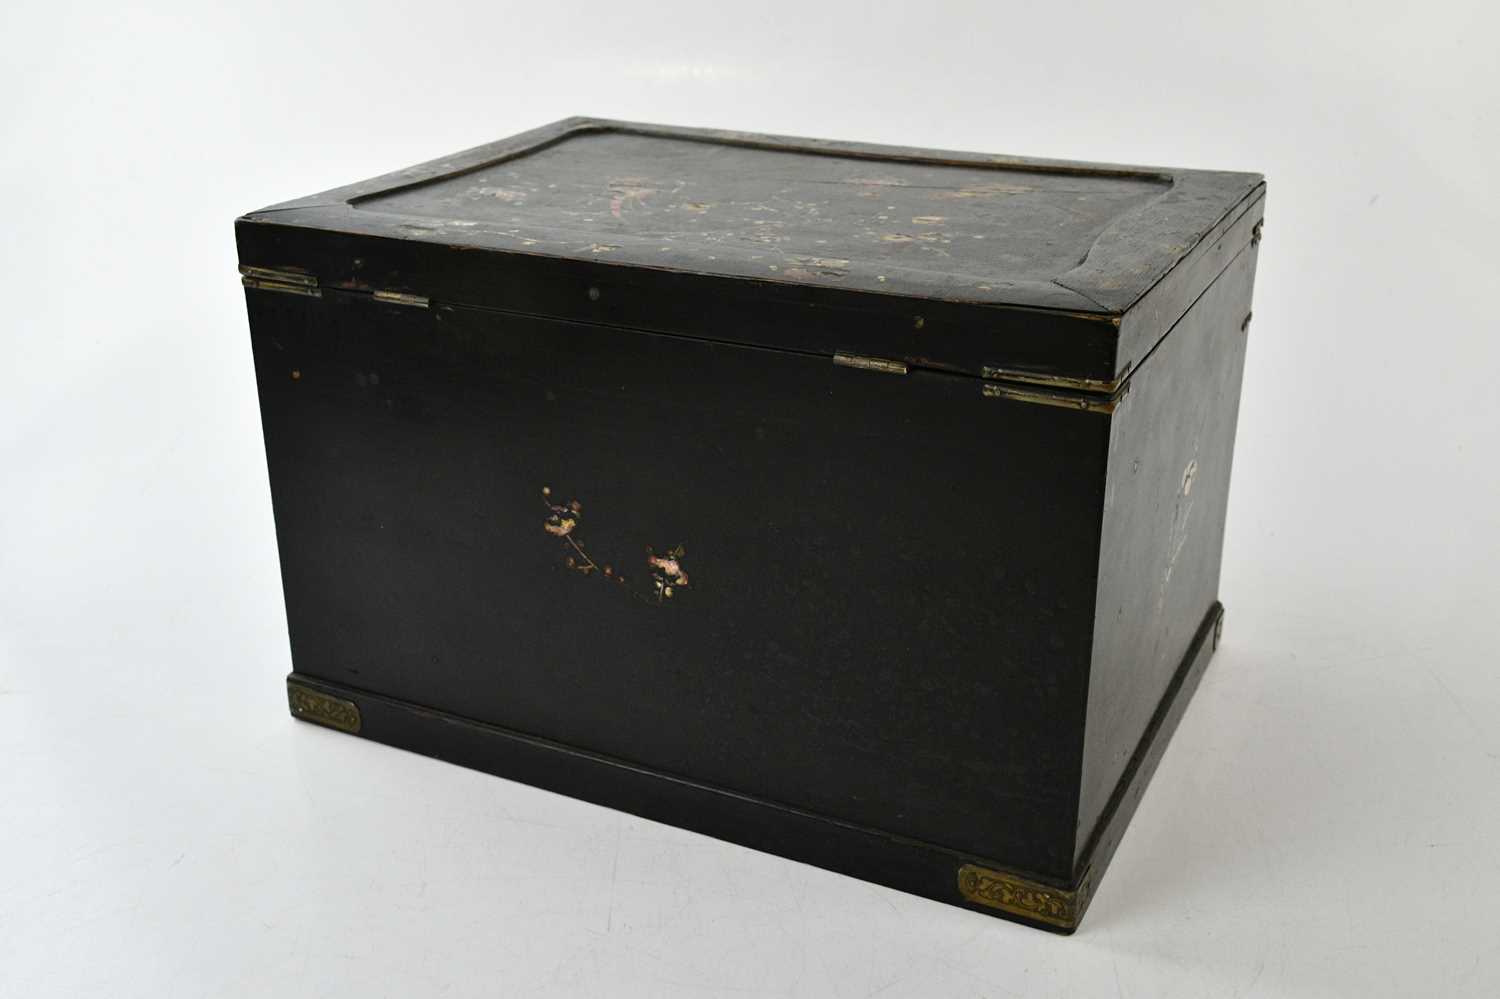 An early 20th century Japanese lacquered jewellery cabinet with mother of pearl inlaid decoration - Image 6 of 6